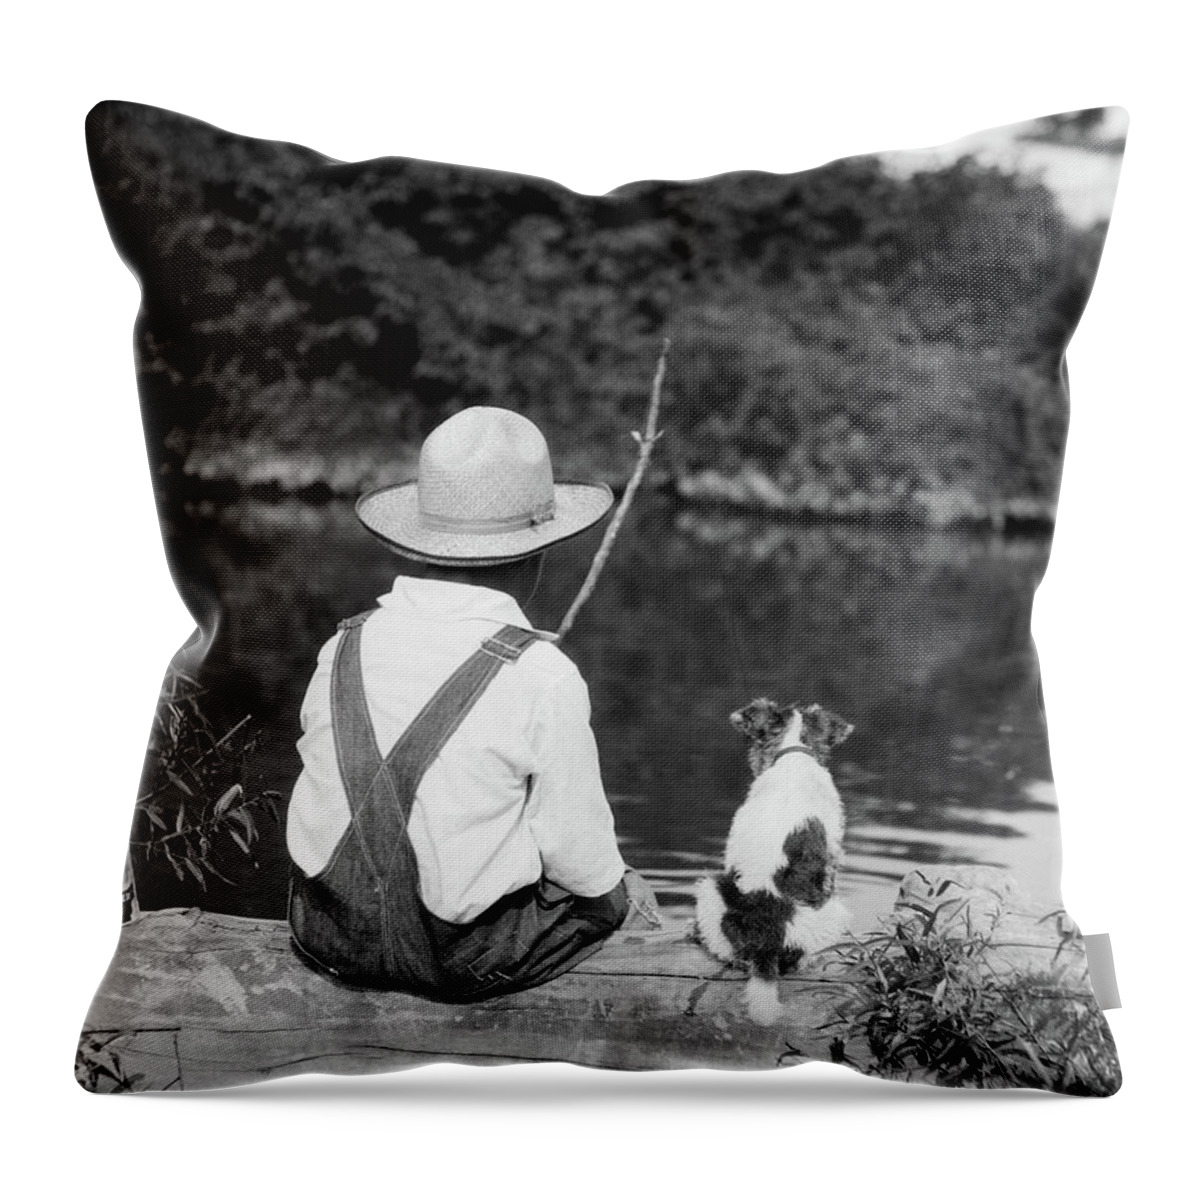 Photography Throw Pillow featuring the photograph 1920s 1930s Farm Boy Wearing Straw Hat by Vintage Images